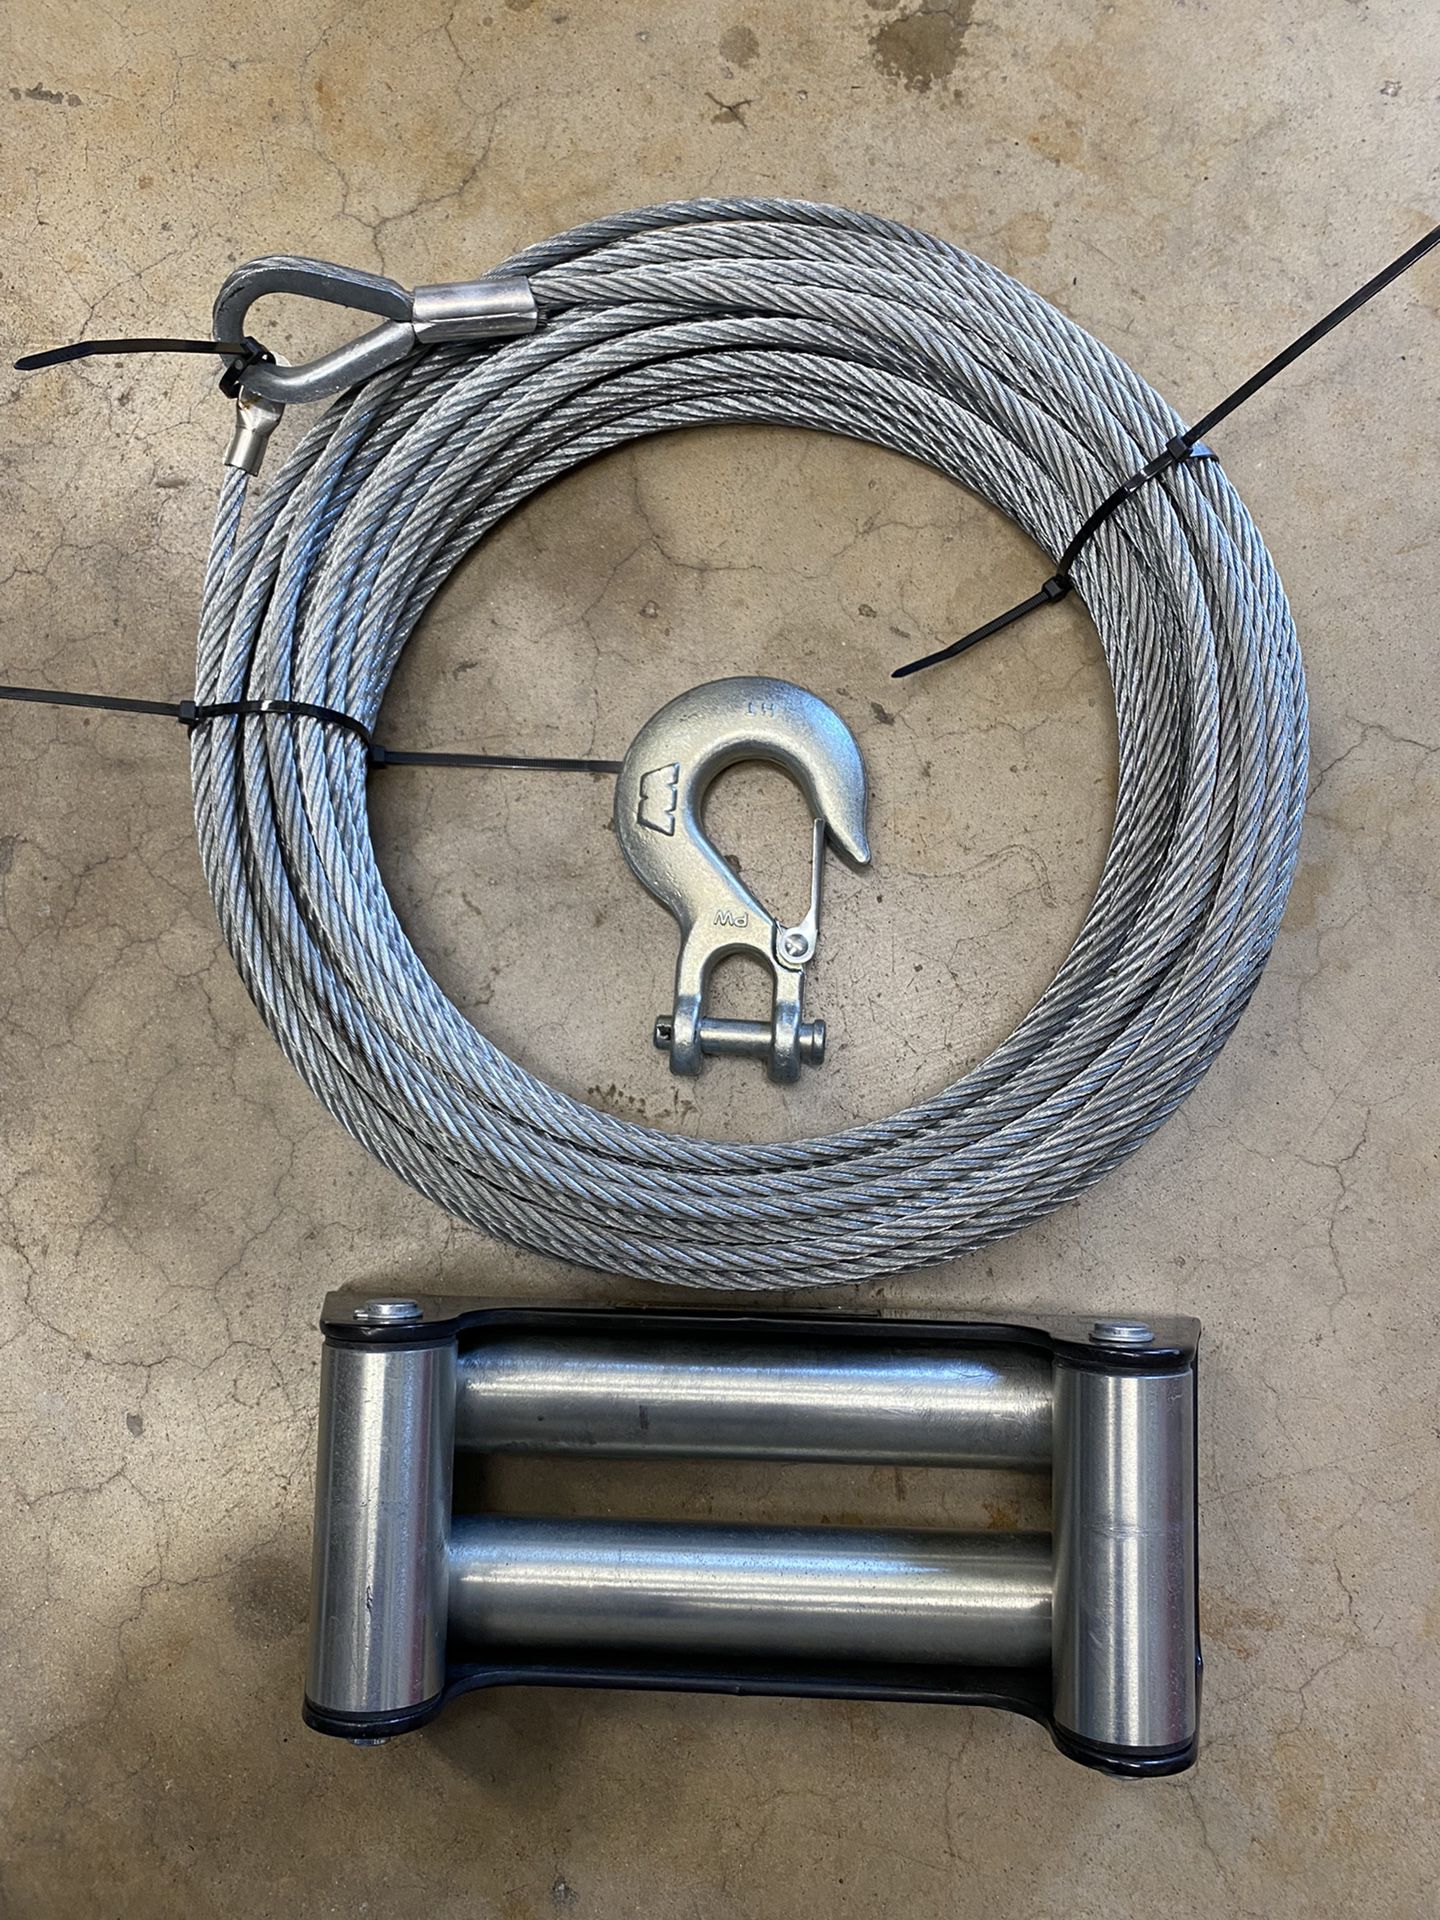 Warn Winch Steel Cable, Hook, and Roller Fairlead